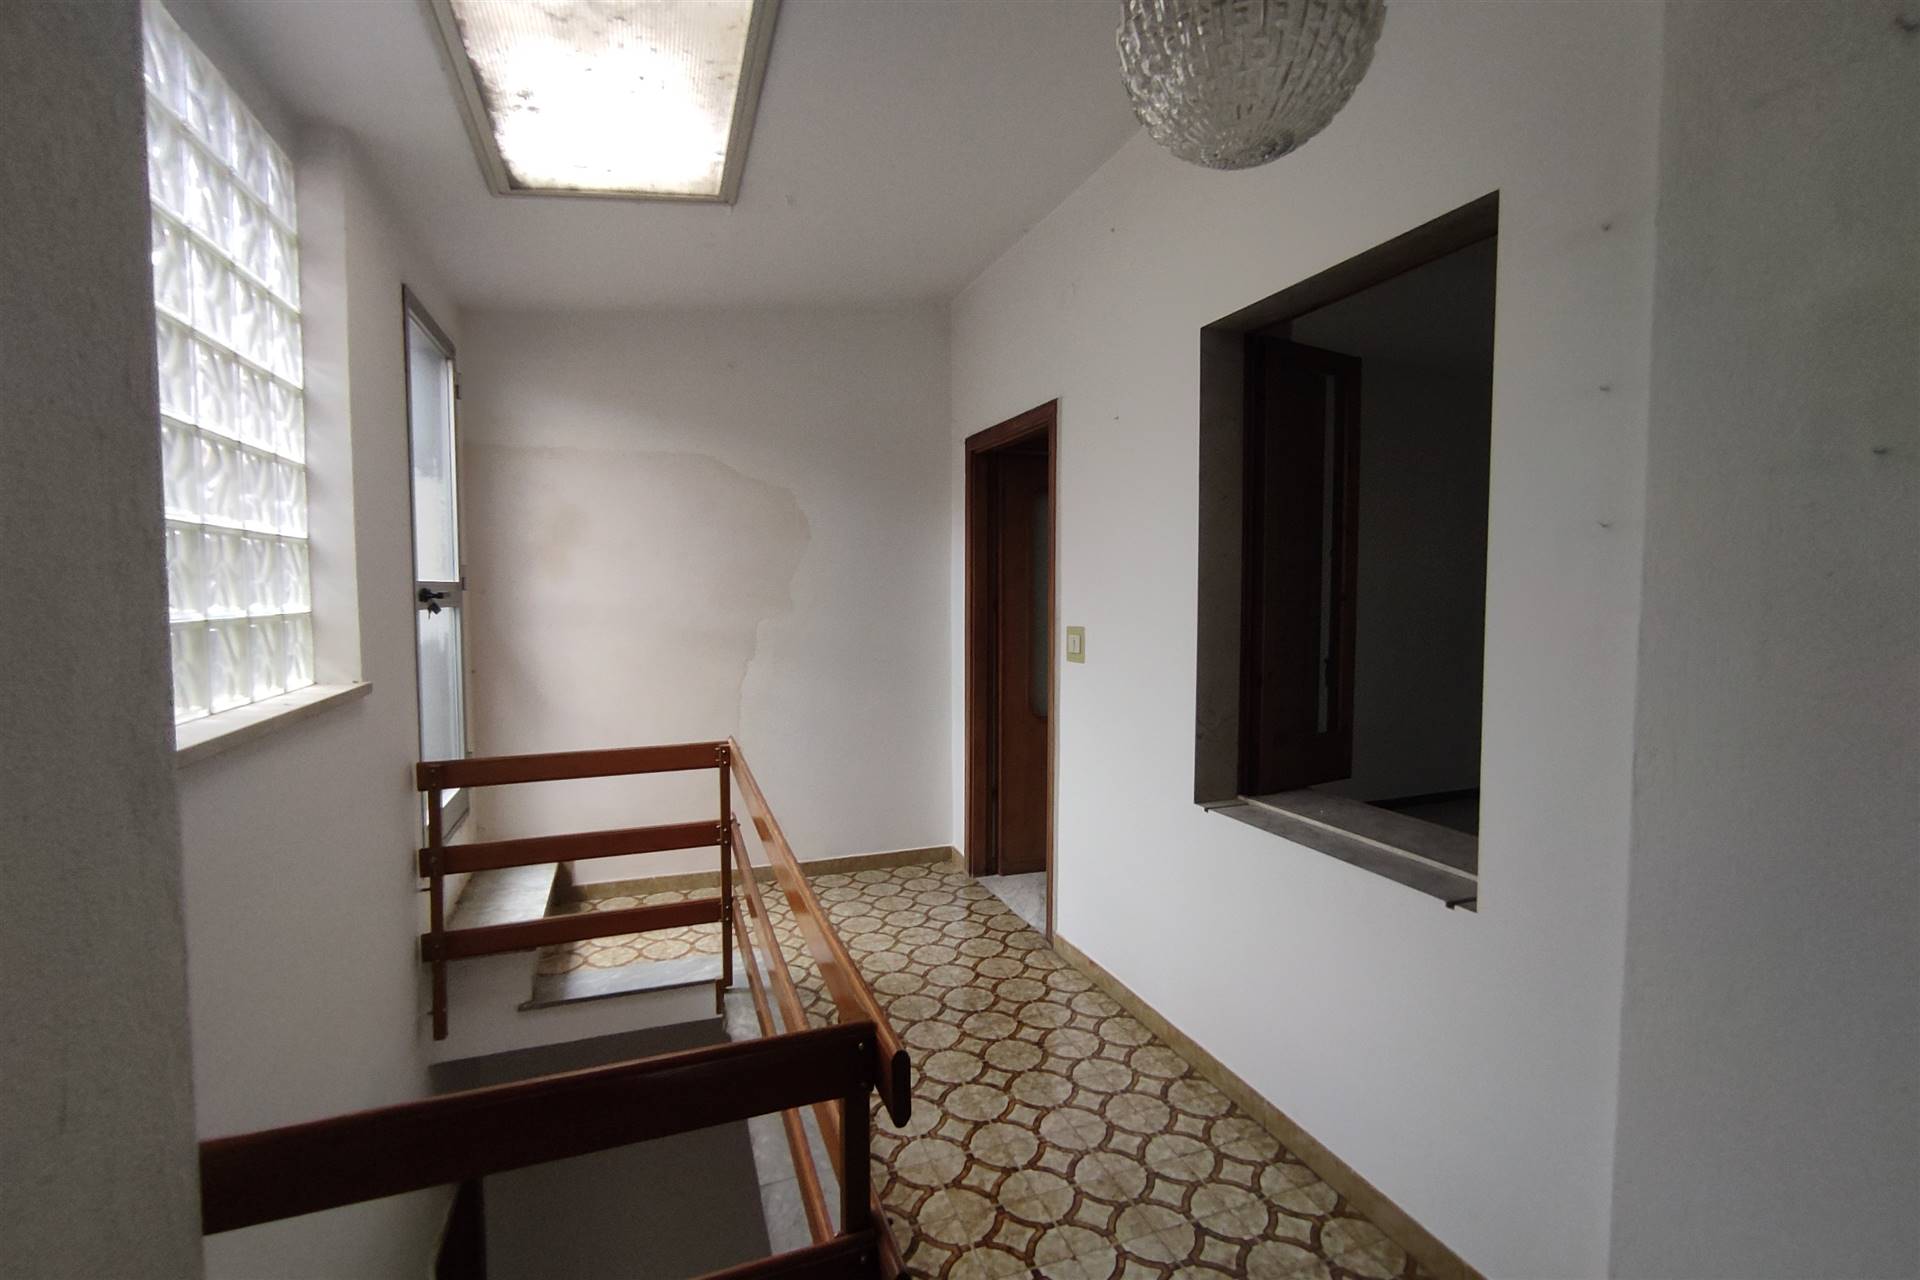 MONTELLA, Single house for sale of 266 Sq. mt., Good condition, Heating Individual heating system, Energetic class: E, placed at 3° on 3, composed 